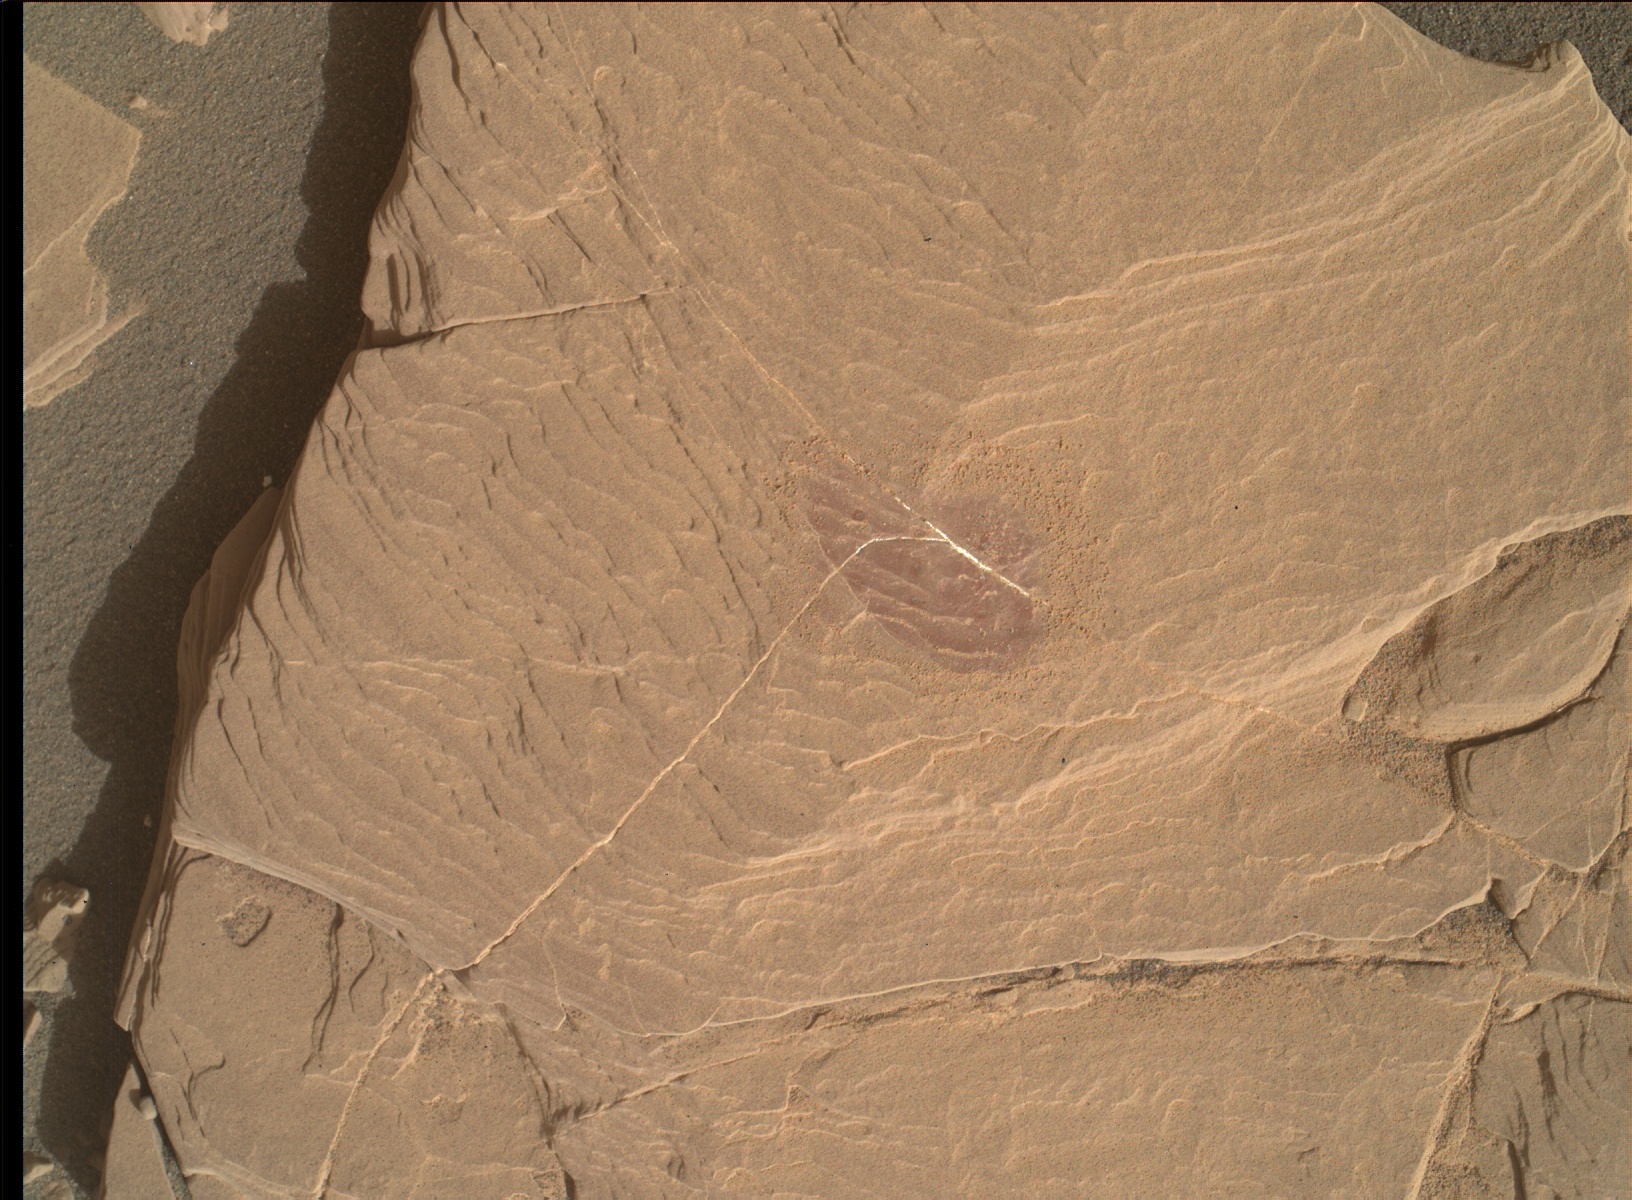 Nasa's Mars rover Curiosity acquired this image using its Mars Hand Lens Imager (MAHLI) on Sol 2042